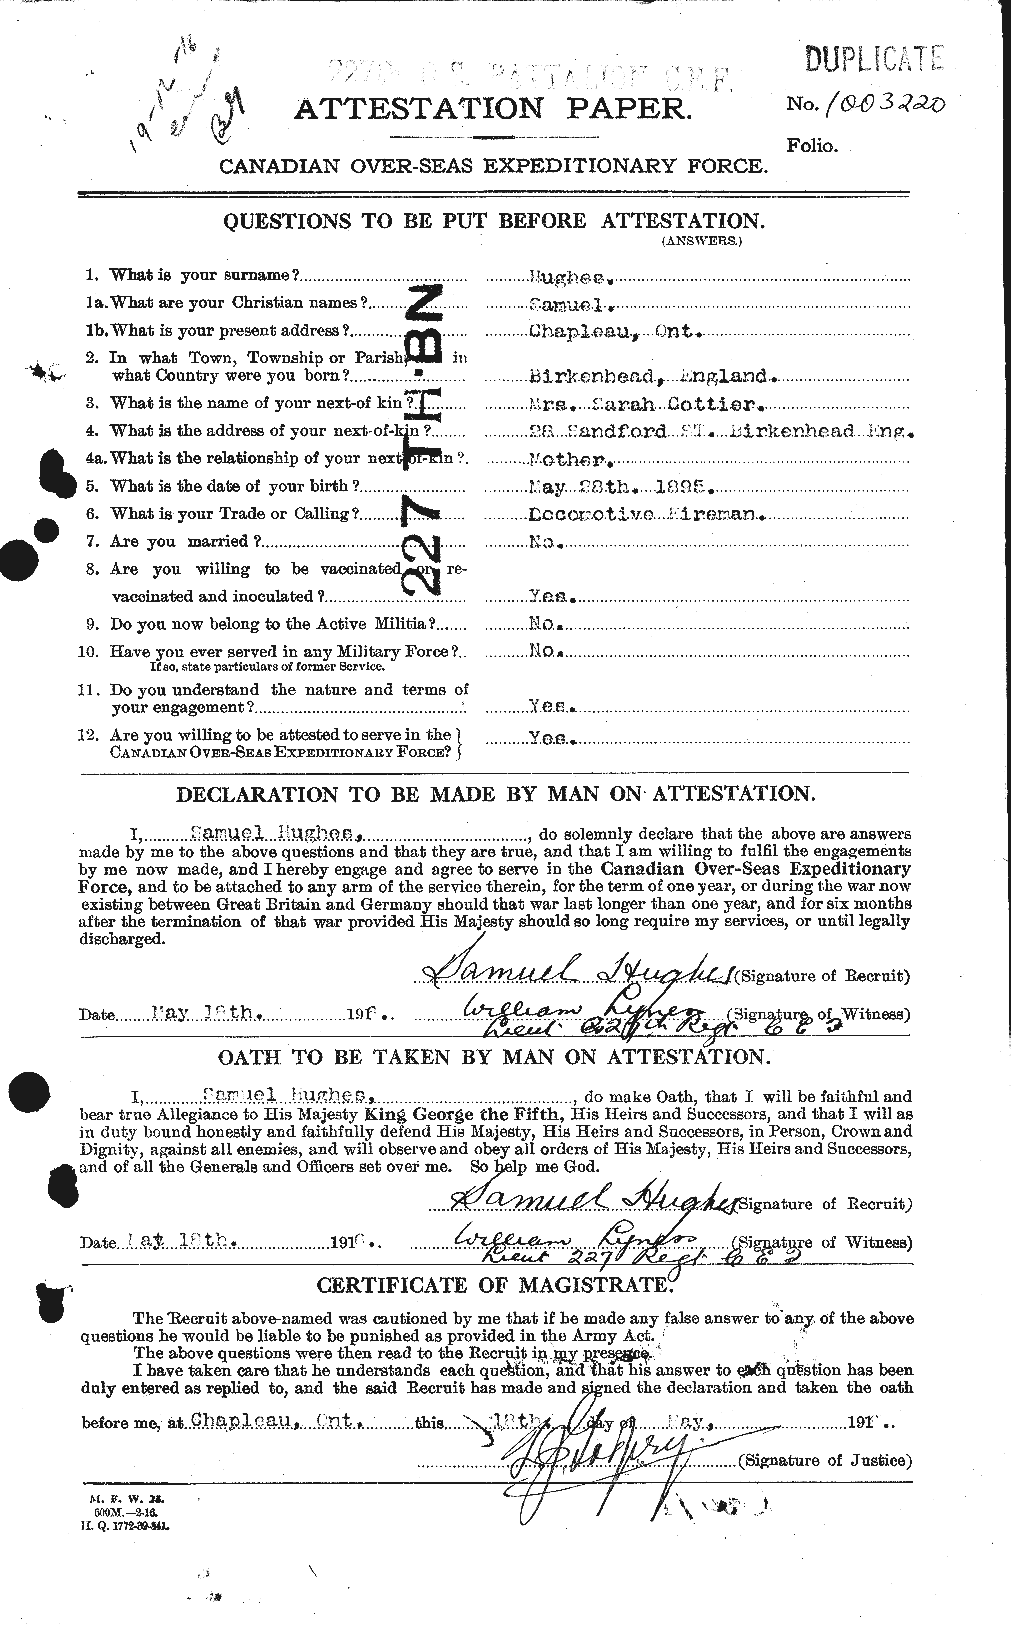 Personnel Records of the First World War - CEF 406637a